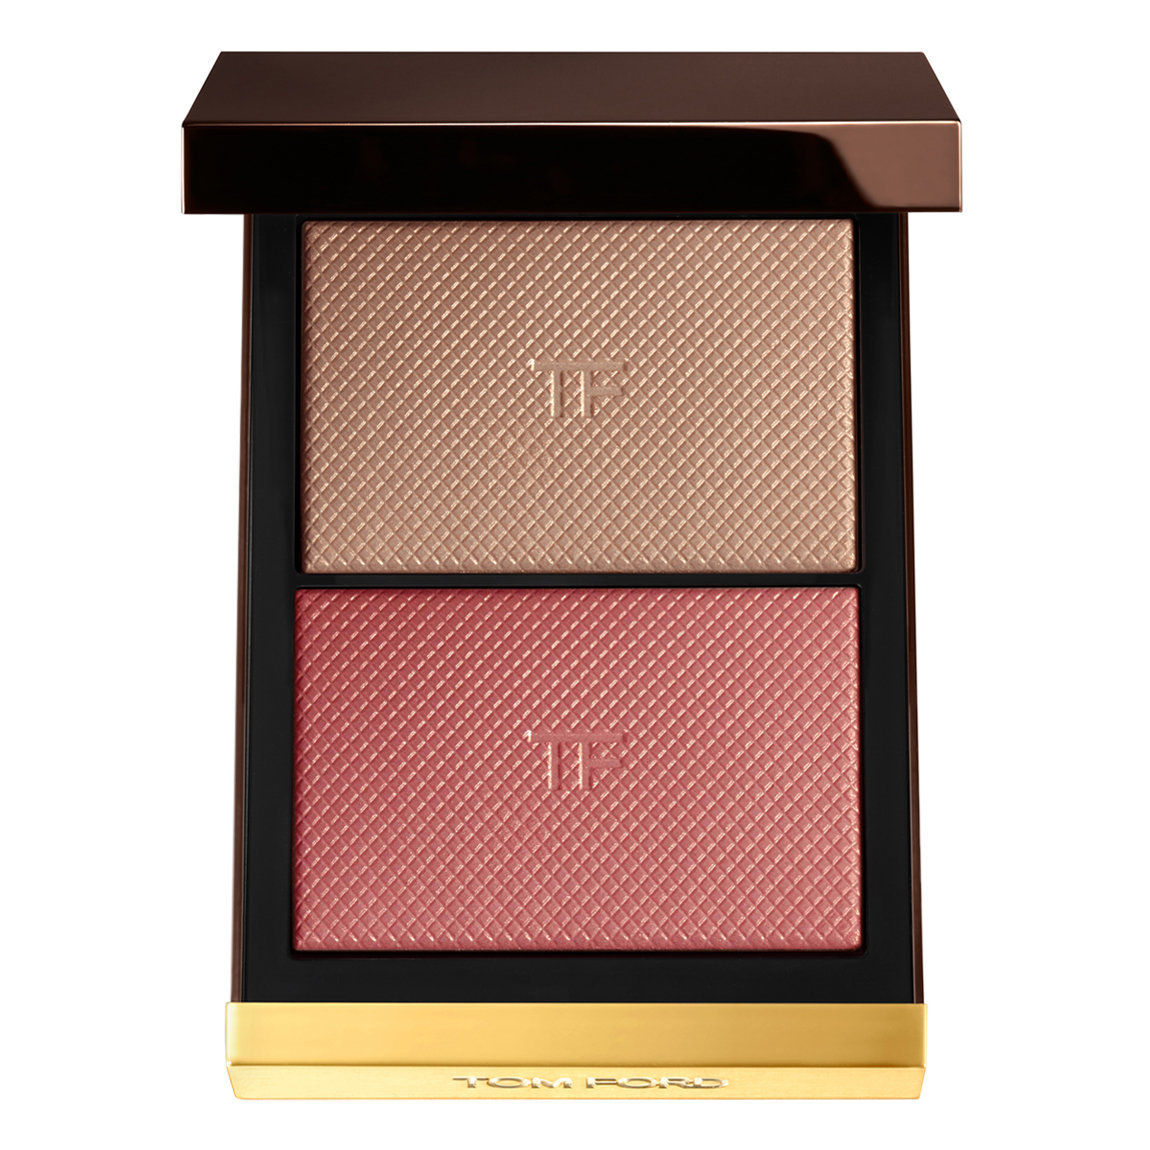 TOM FORD Skin Illuminating Powder Duo Incandescent alternative view 1 - product swatch.